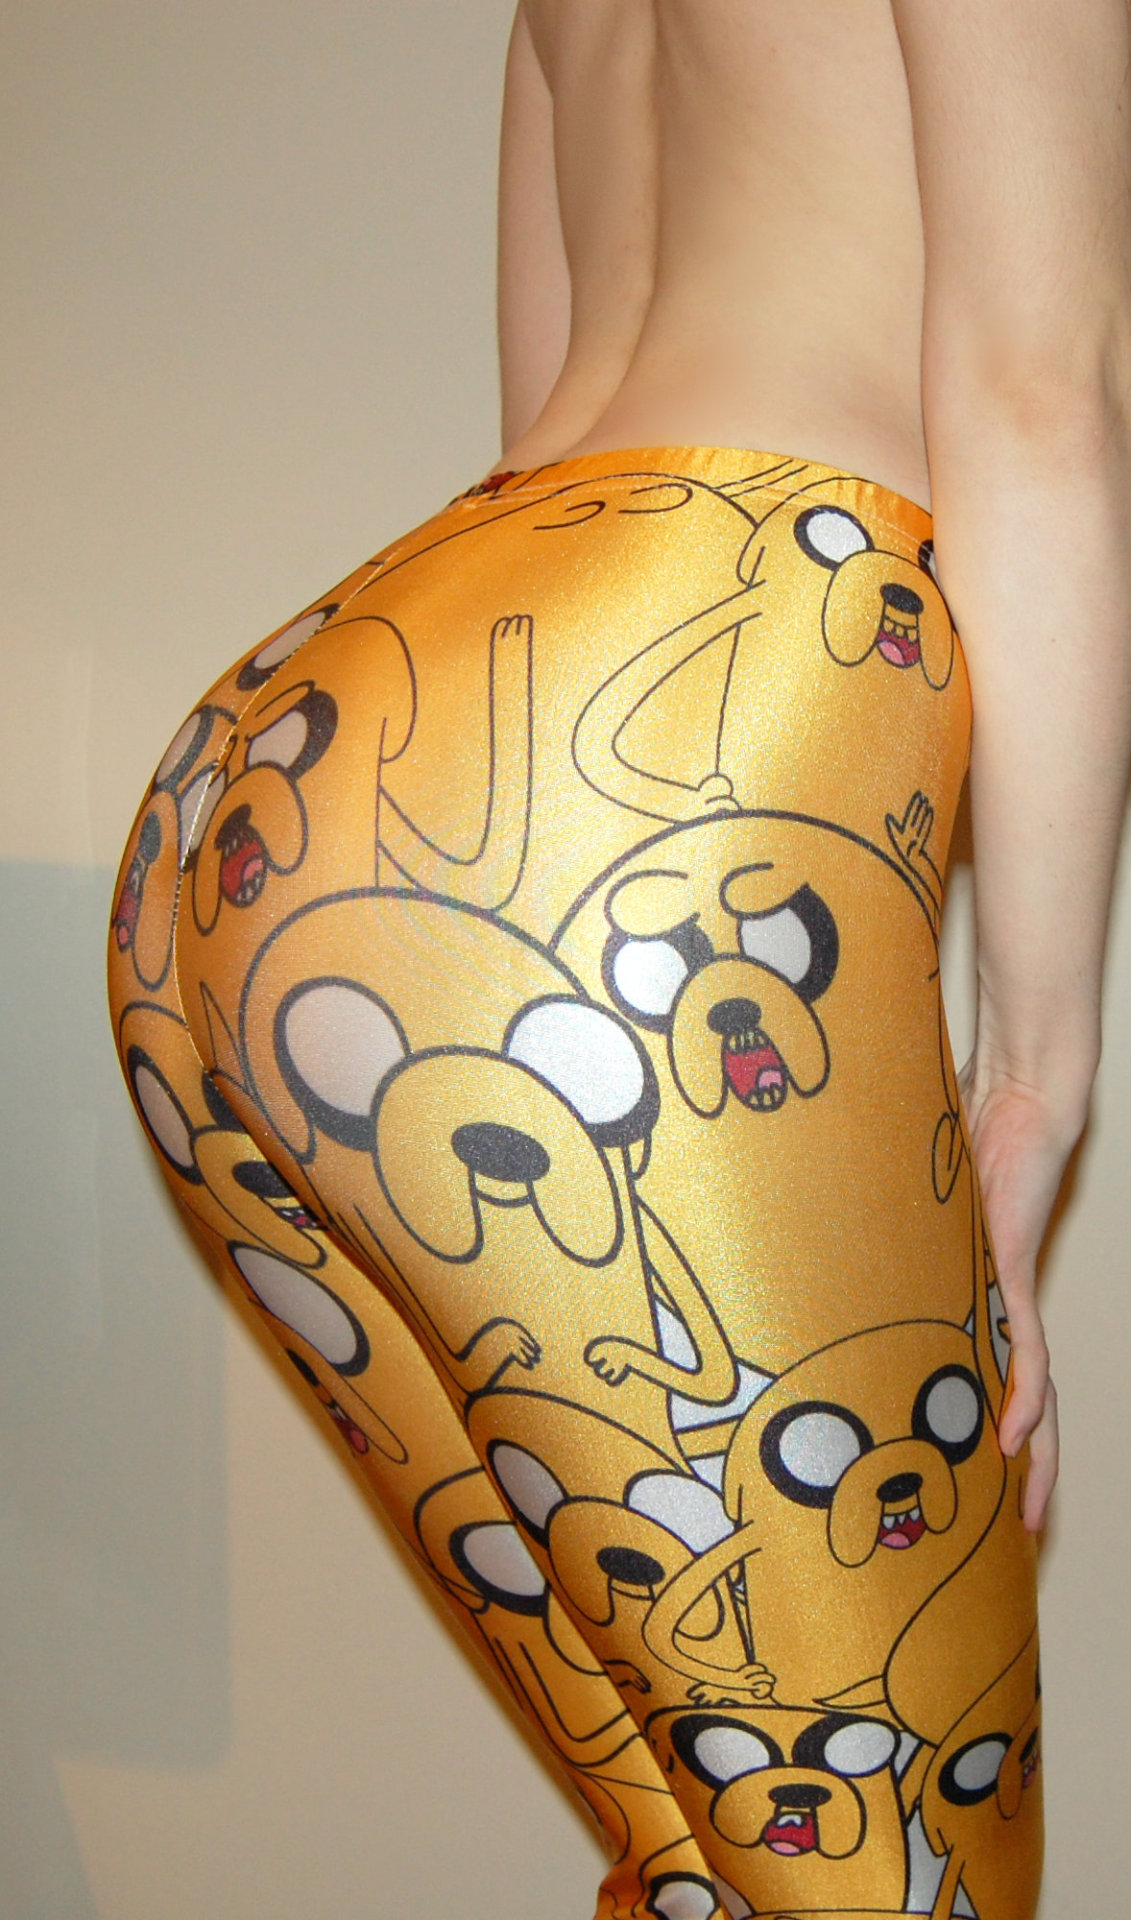 her-ghost-story:  girl! get in here with those hot buns!  and my jake-butt matches